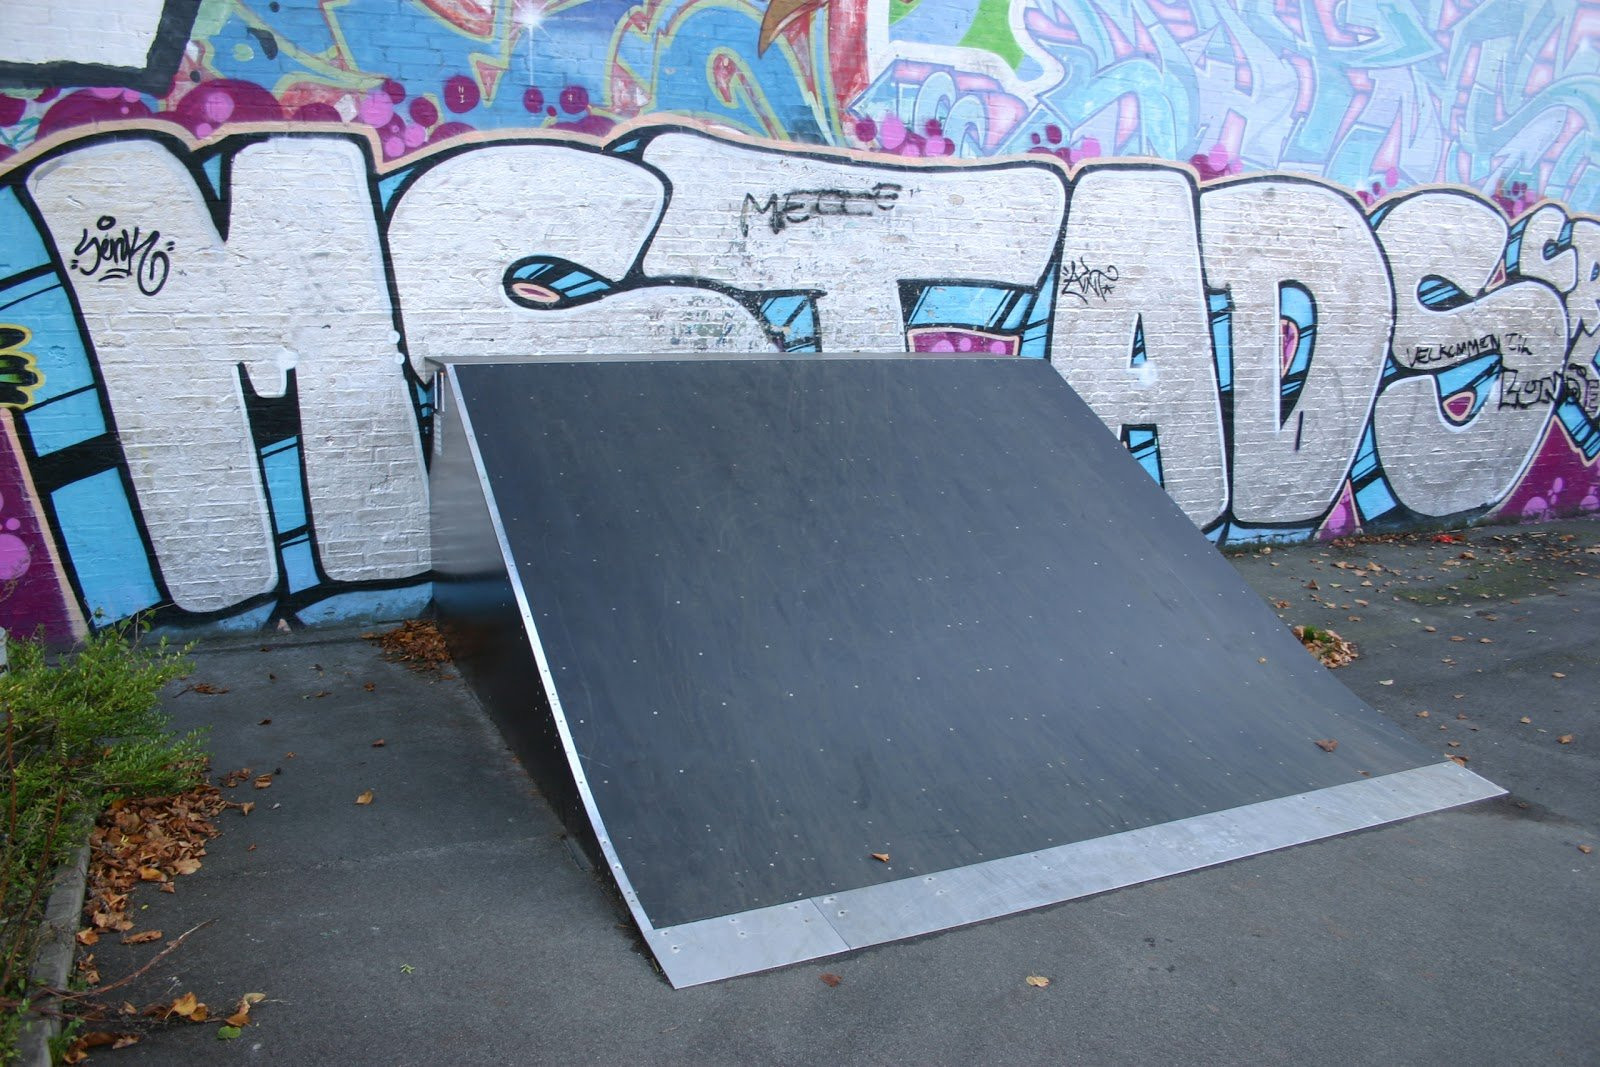 Albertslund Skatepark&nbsp;is relatively small and has a bank at one end, a fun box in the middle with an appurtenant ledge (a so-called hubba), and a quarter pipe at the other end. It also has a long pole rail and stone curbs. The foundation is asphalt. The skatepark is compact which can become a problem as you gain too much speed to perform tricks. The park is not worth traveling far to get to, however, if you are in the neighbourhood, you can stop by for a relaxed session. The park is located about 5 minutes from Albertslund station and is also close to the graffiti wall between Kongsholmhallen and the bicycle track if you follow the railroad.Albertslund Skatepark was built in September of 2012 by Skateland Constructions. It also has street hockey and soccer. The ramps were built after the student city council day in 2011 when all 6th grades of Albertslund presented suggestions for projects in the town. This story goes to show that there is a lot of support for skate-ideas. If you dream it, you can make it happen. Even if your in 6th grade. Awesome Idea?